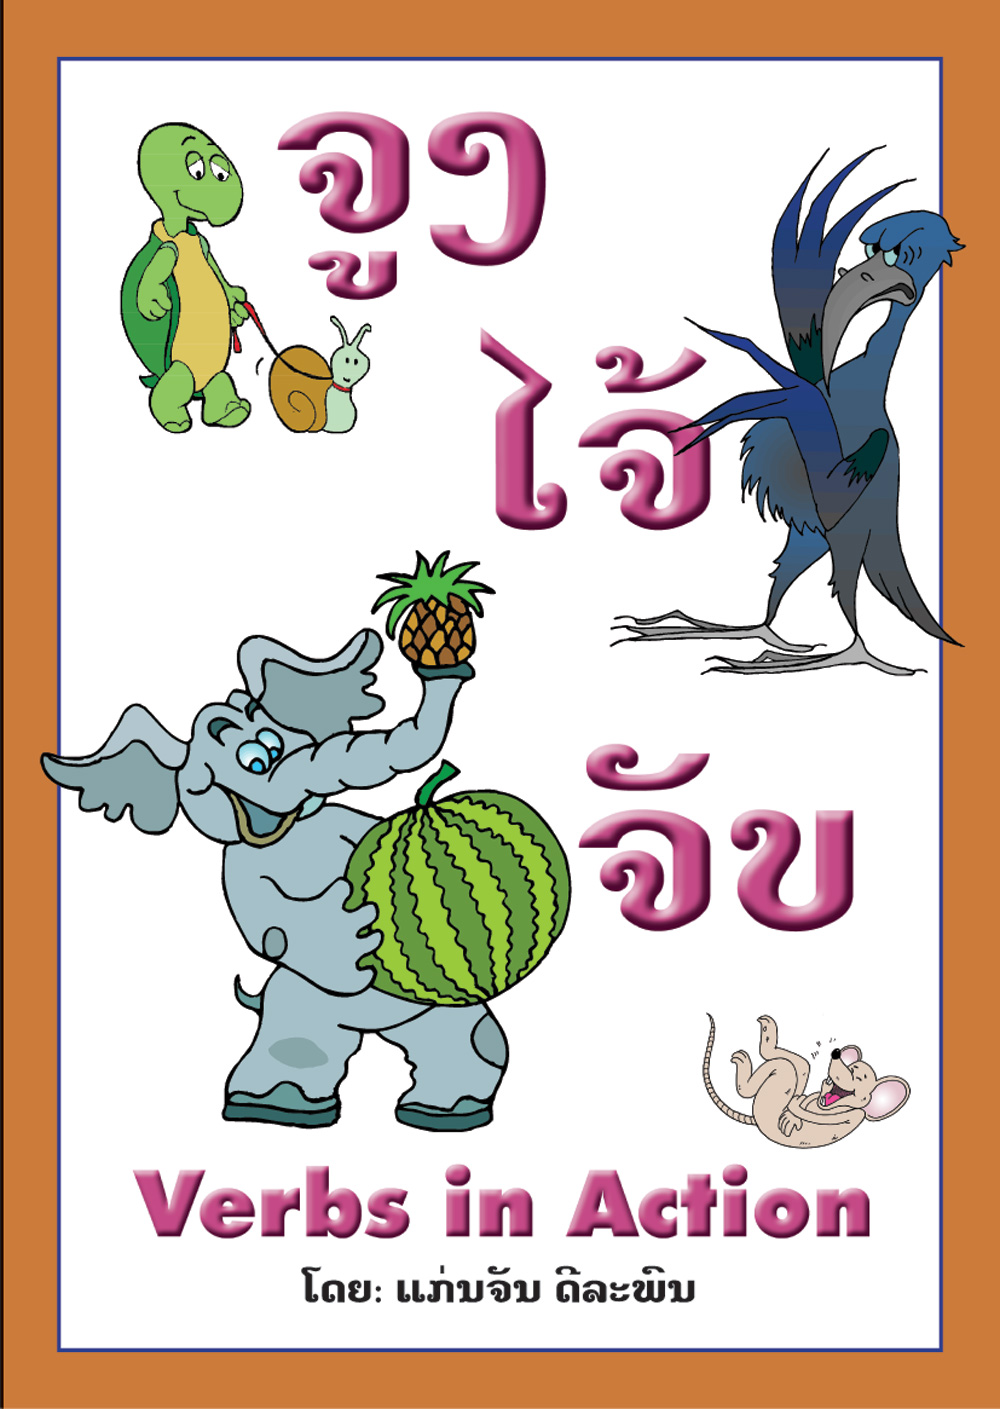 Verbs in Action large book cover, published in Lao and English